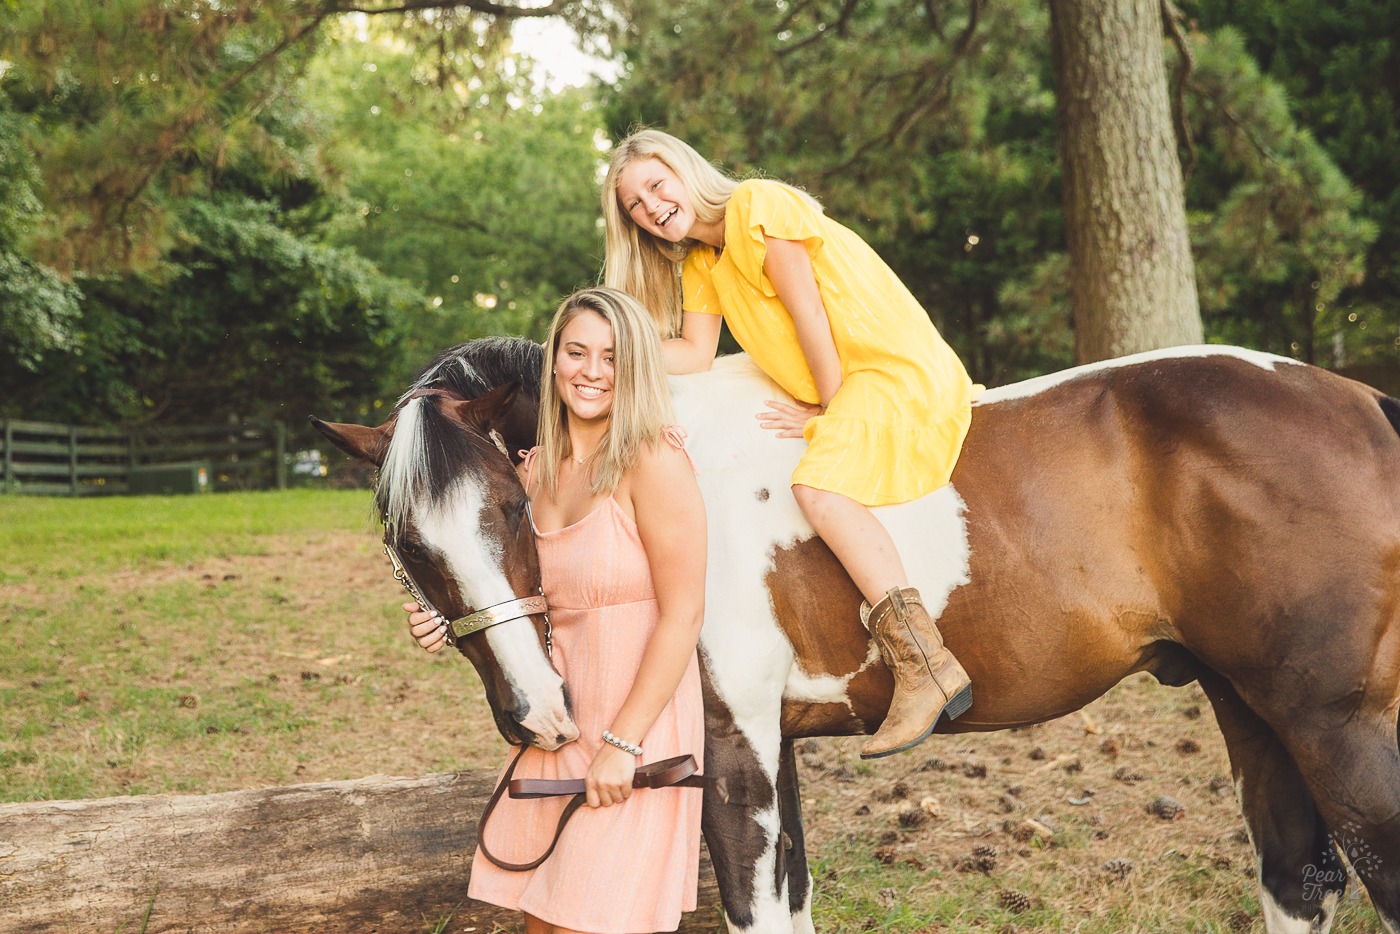 Two sisters smiling and laughing during their paint horse photo shoot misbehaving as he chews on one sister's dress